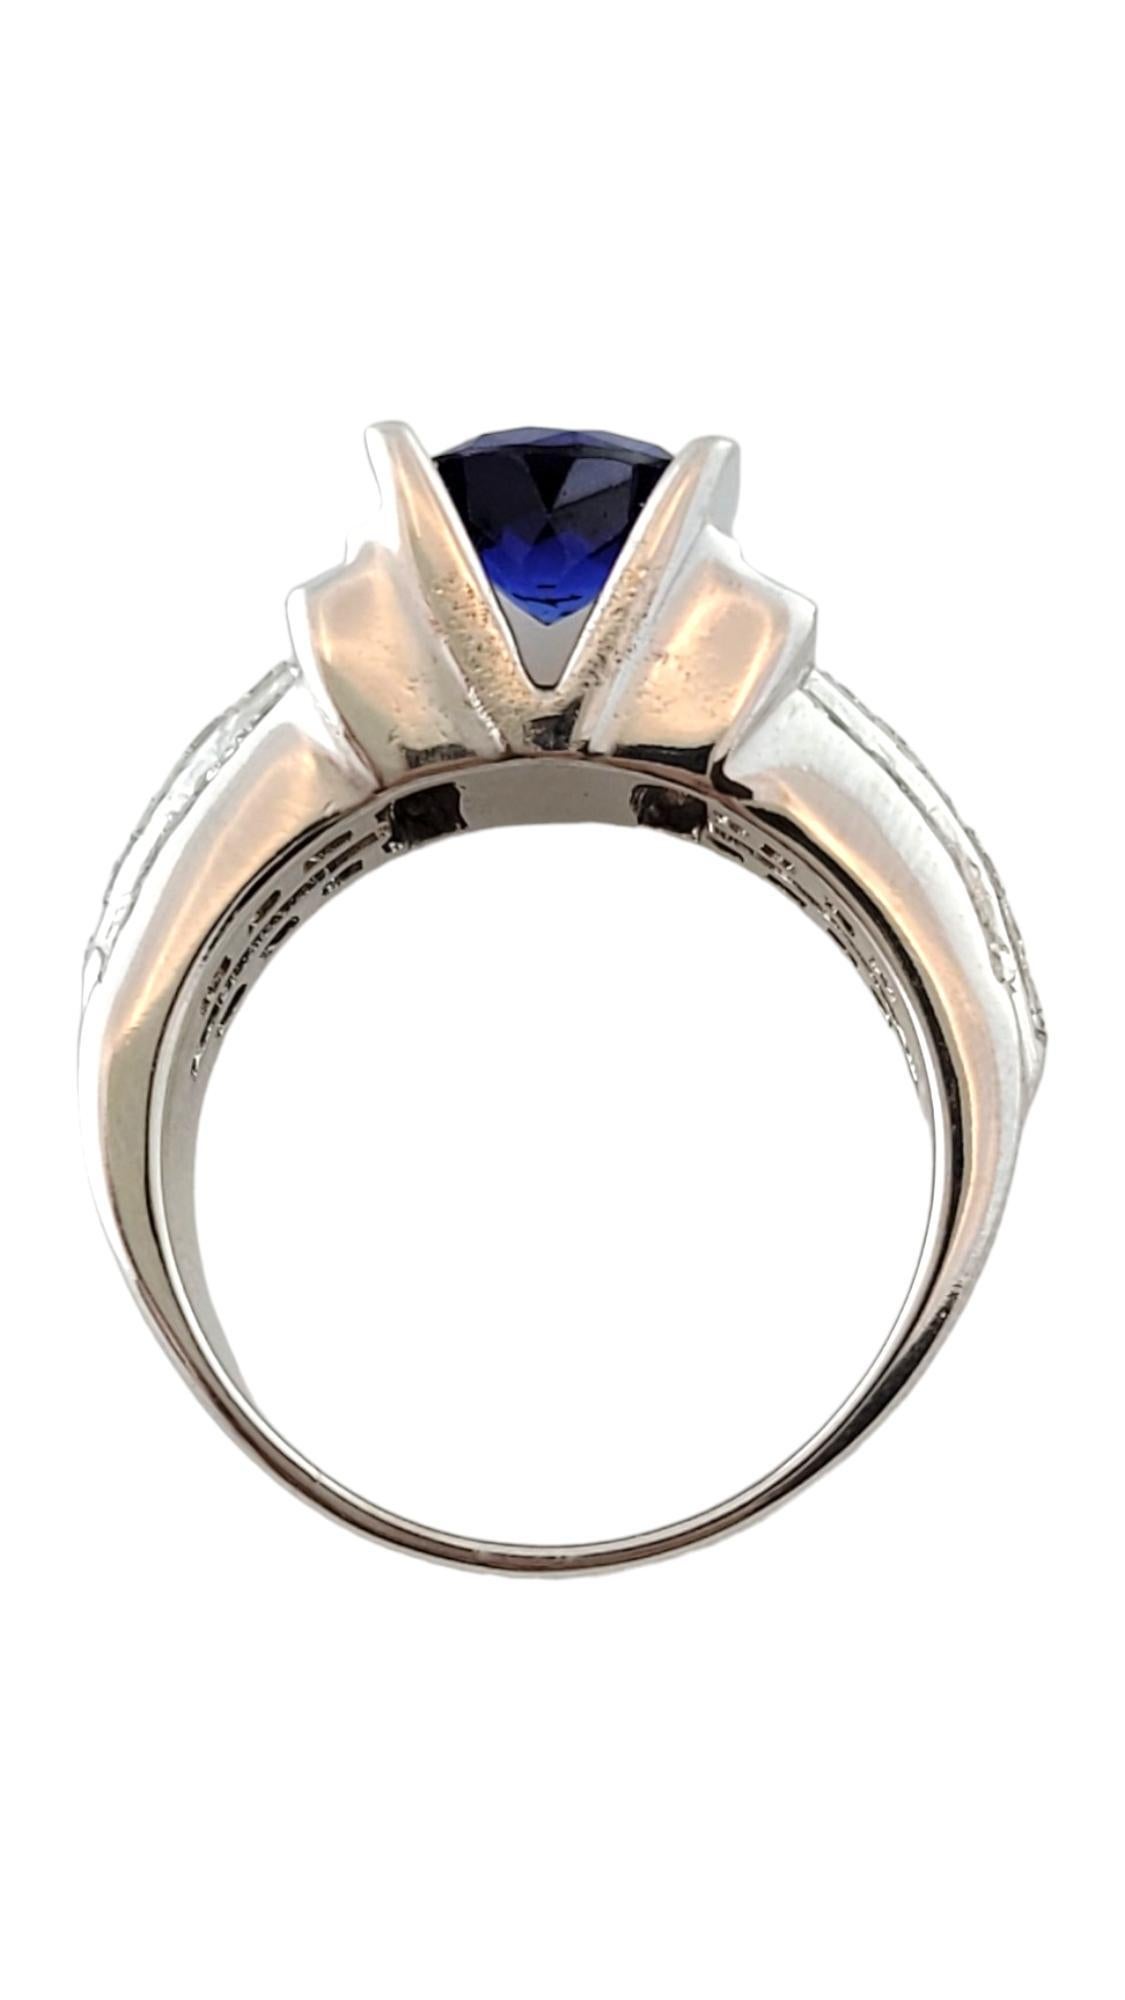 Brilliant Cut 14K White Gold Sapphire and Diamond Ring Size 7.25-7.5 #16454 For Sale